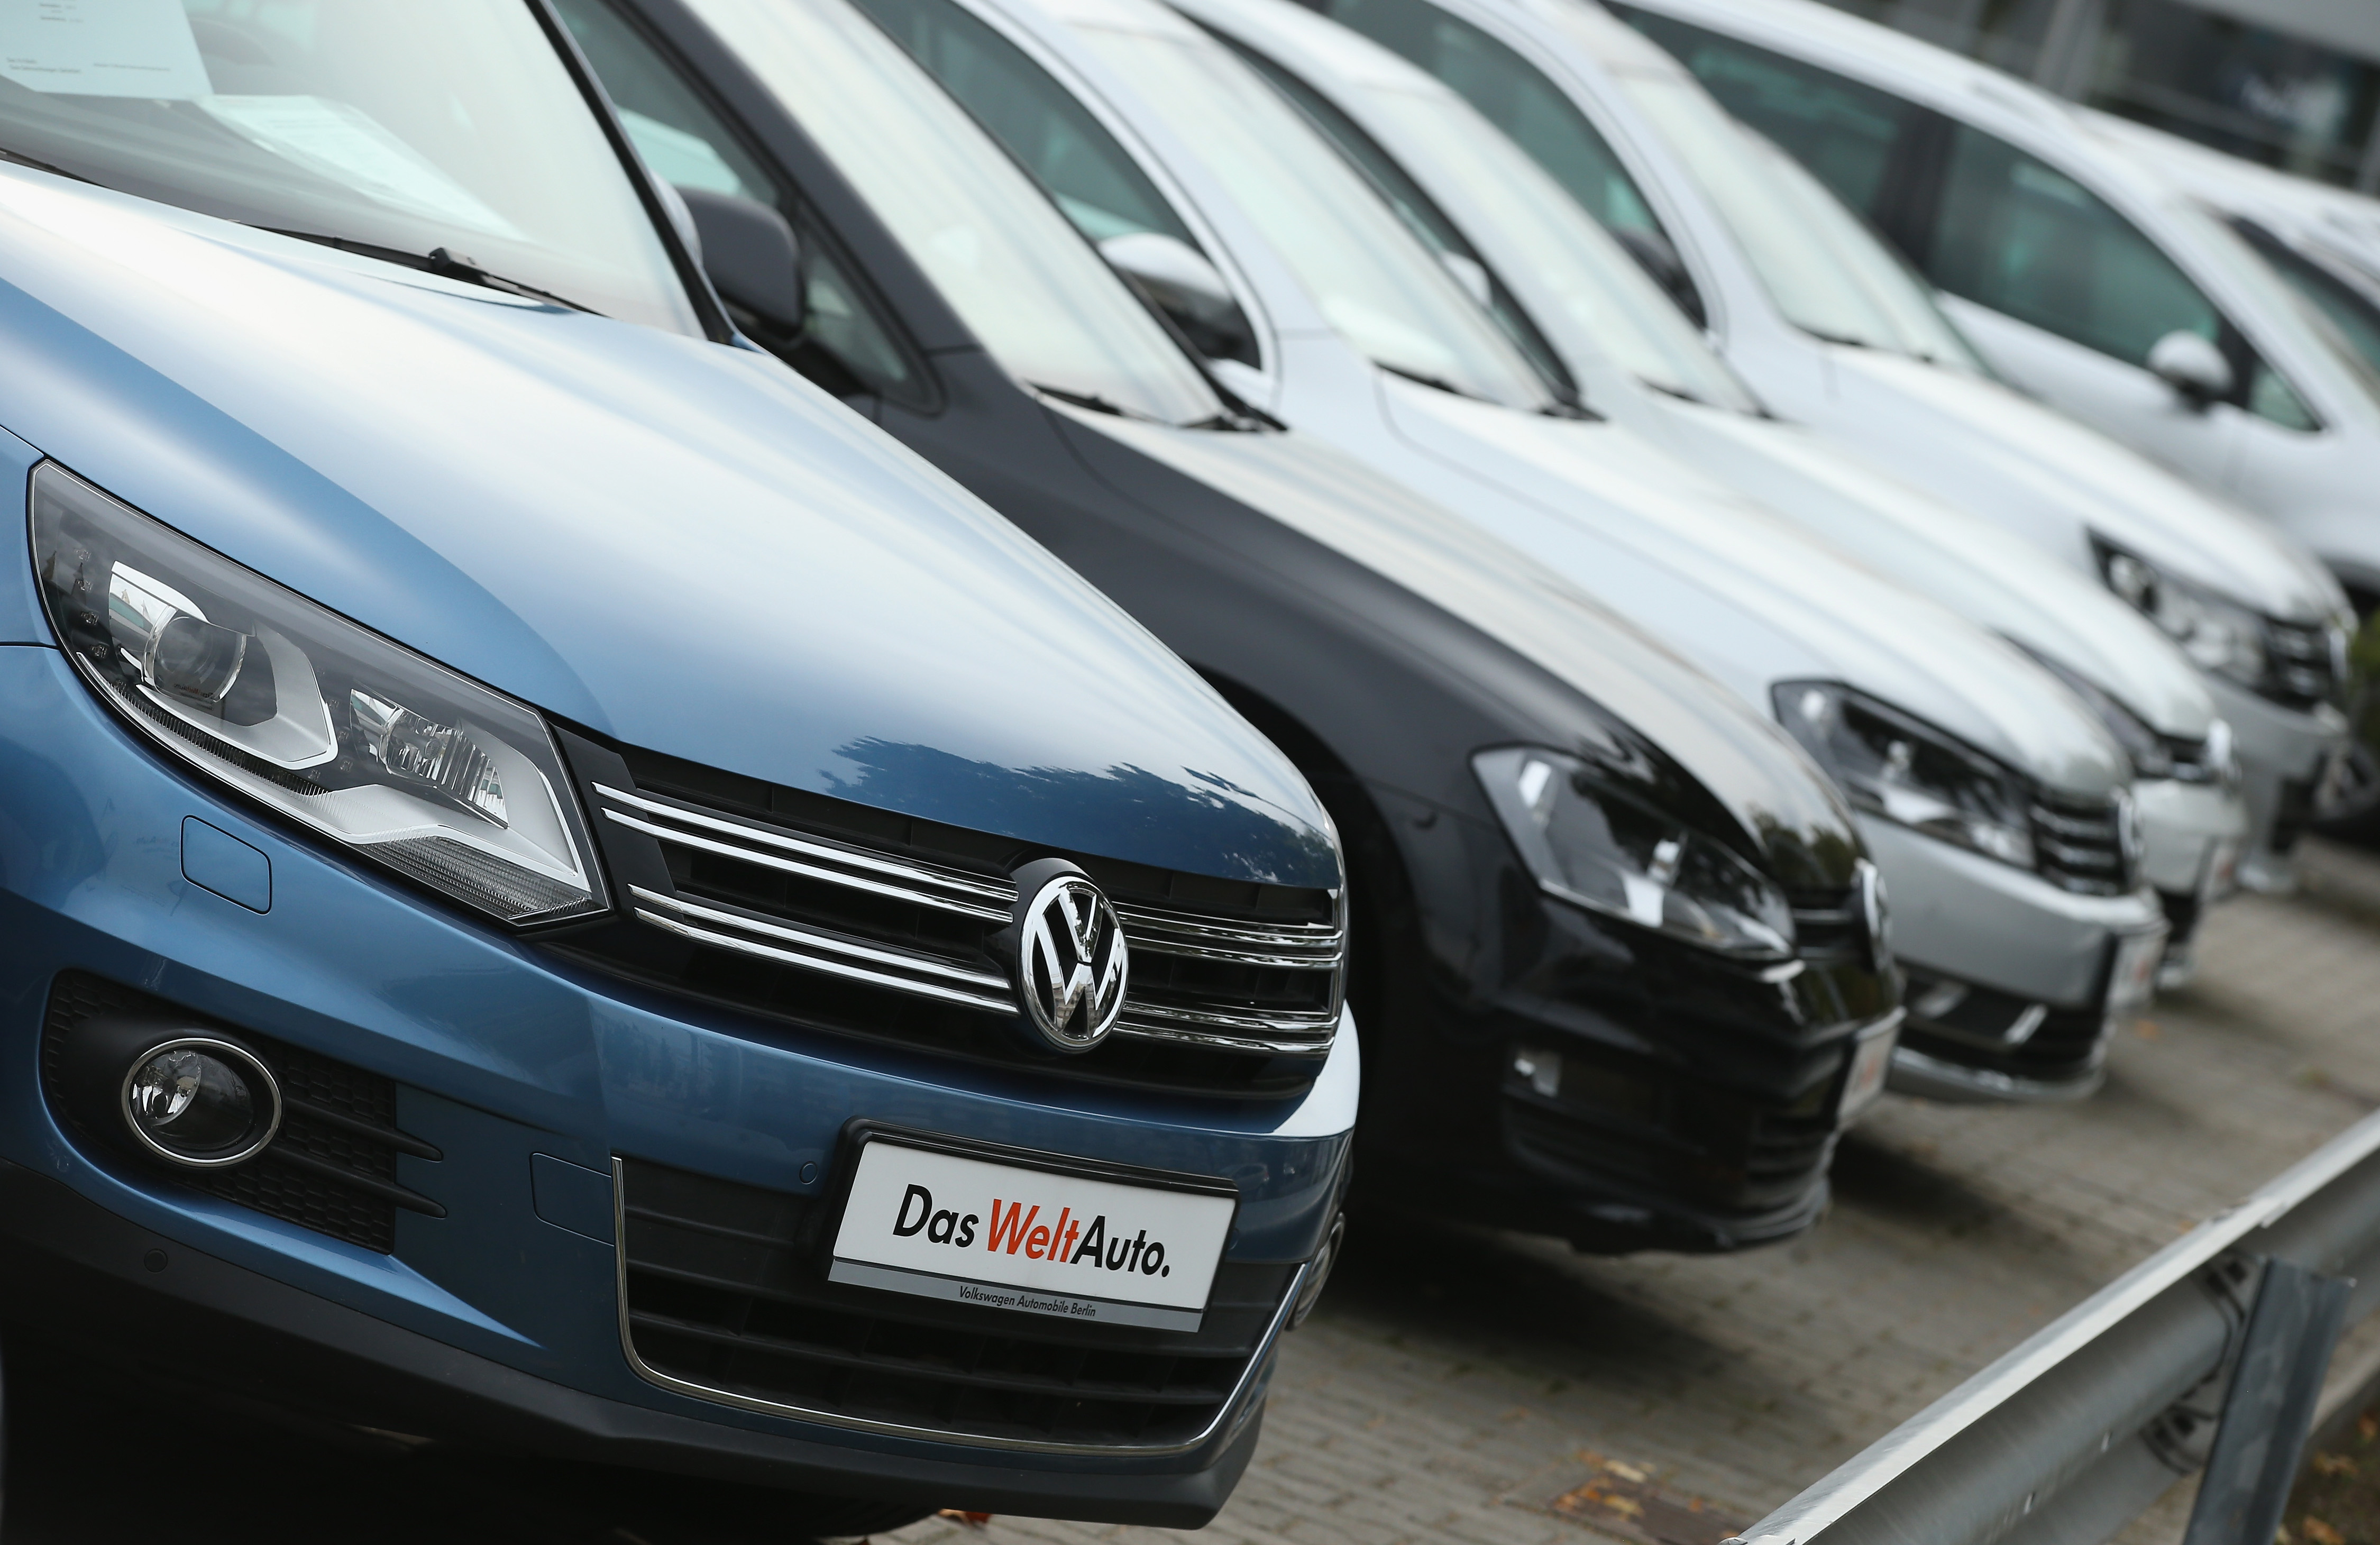 Used cars of German carmaker Volkswagen stand on display at a Volkswagen car dealership on September 22, 2015 in Berlin, Germany. (Sean Gallup&mdash;Getty Images)